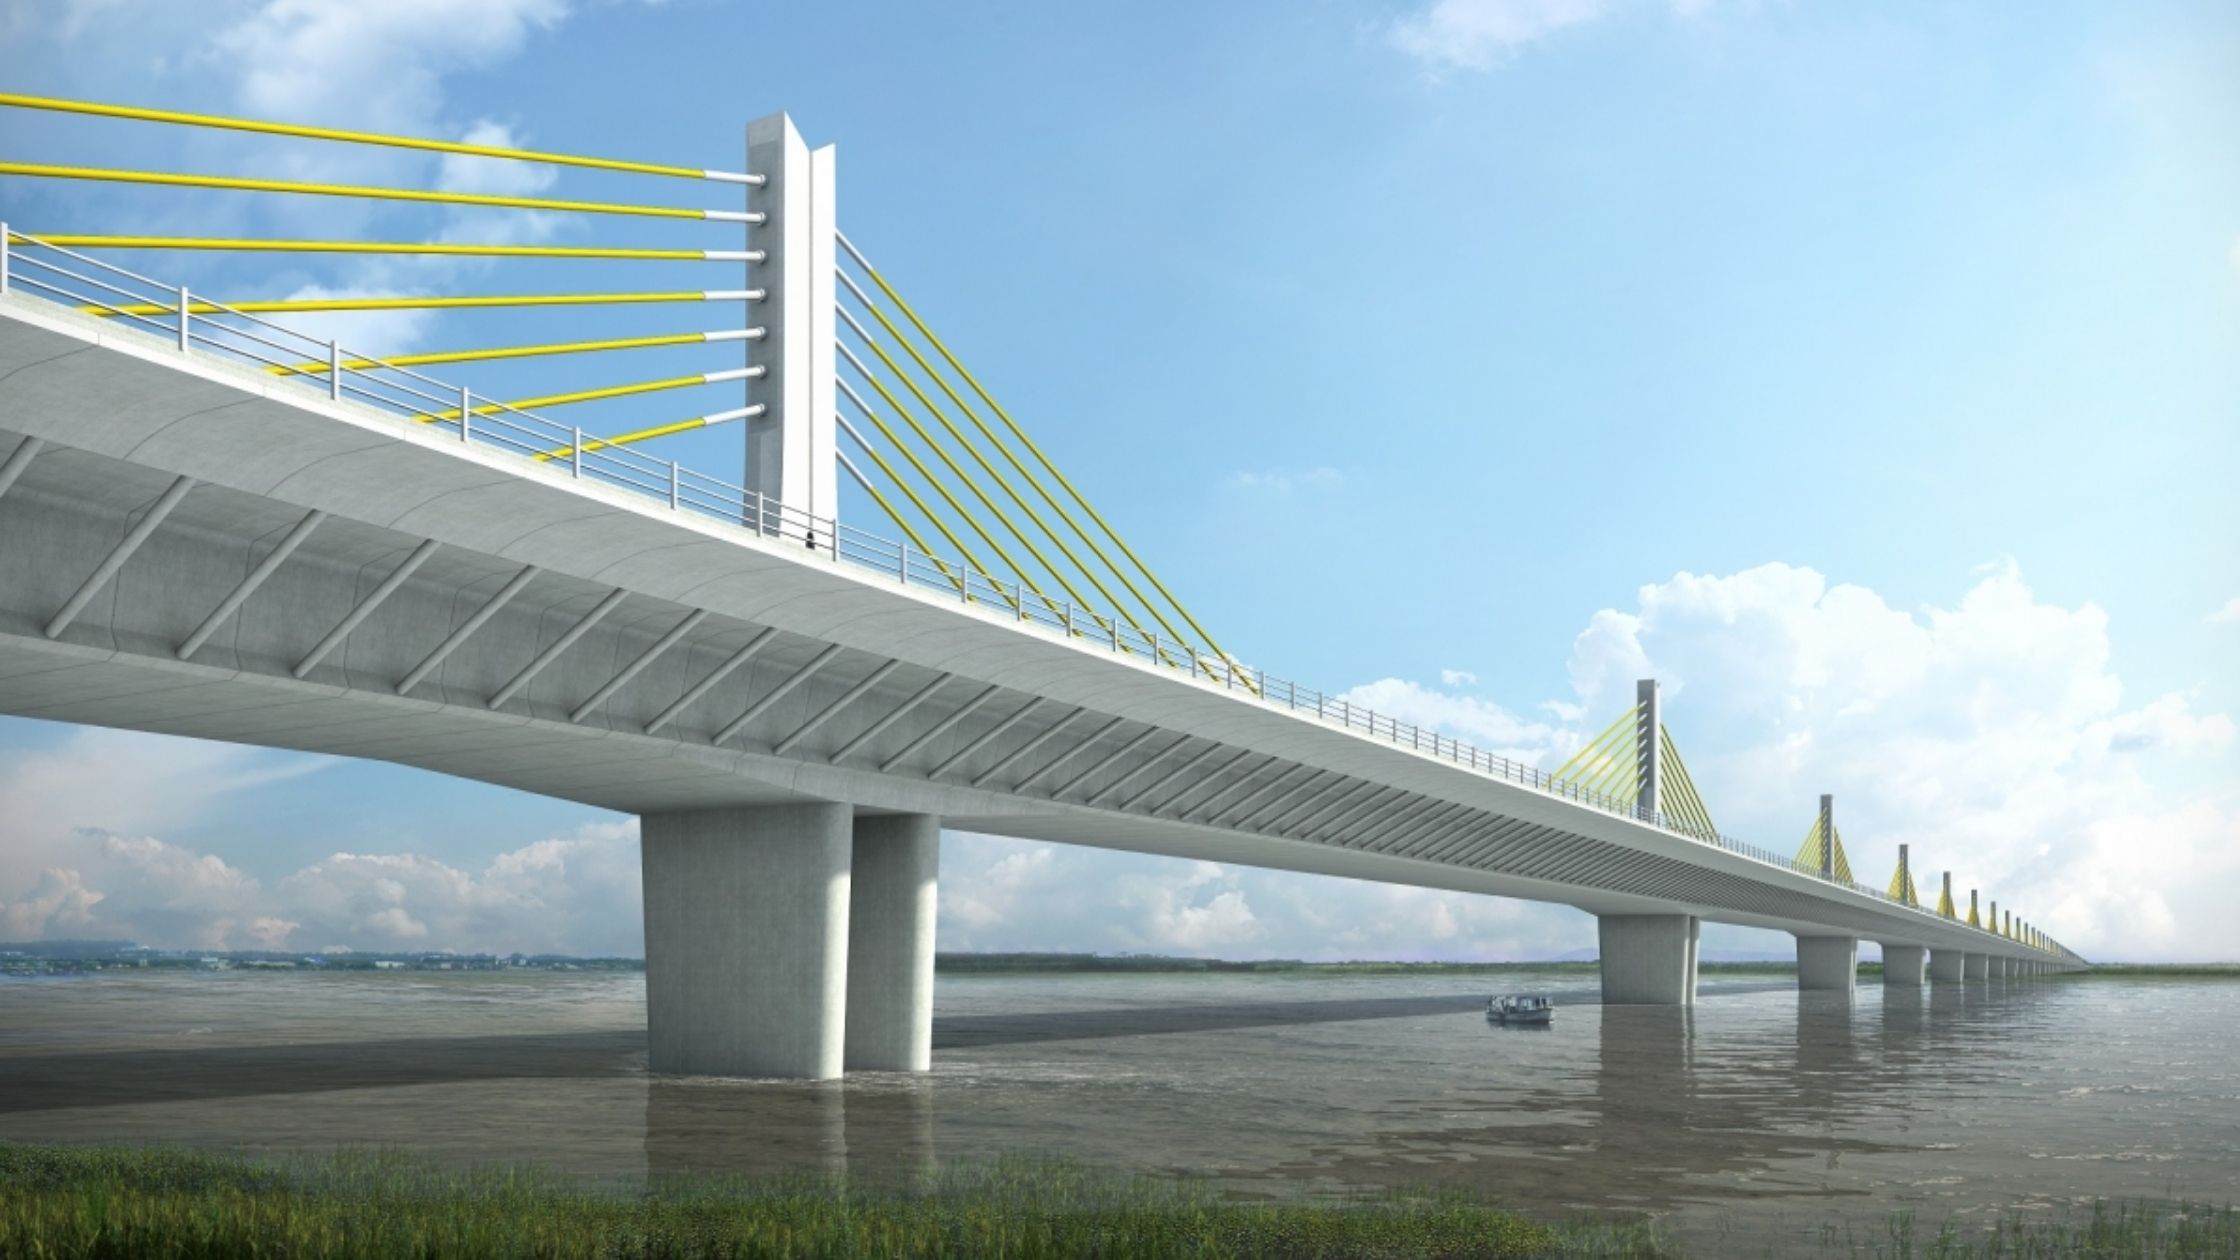 Two big 6 lane bridges are being built at the eastern and western ends of this city of Bihar